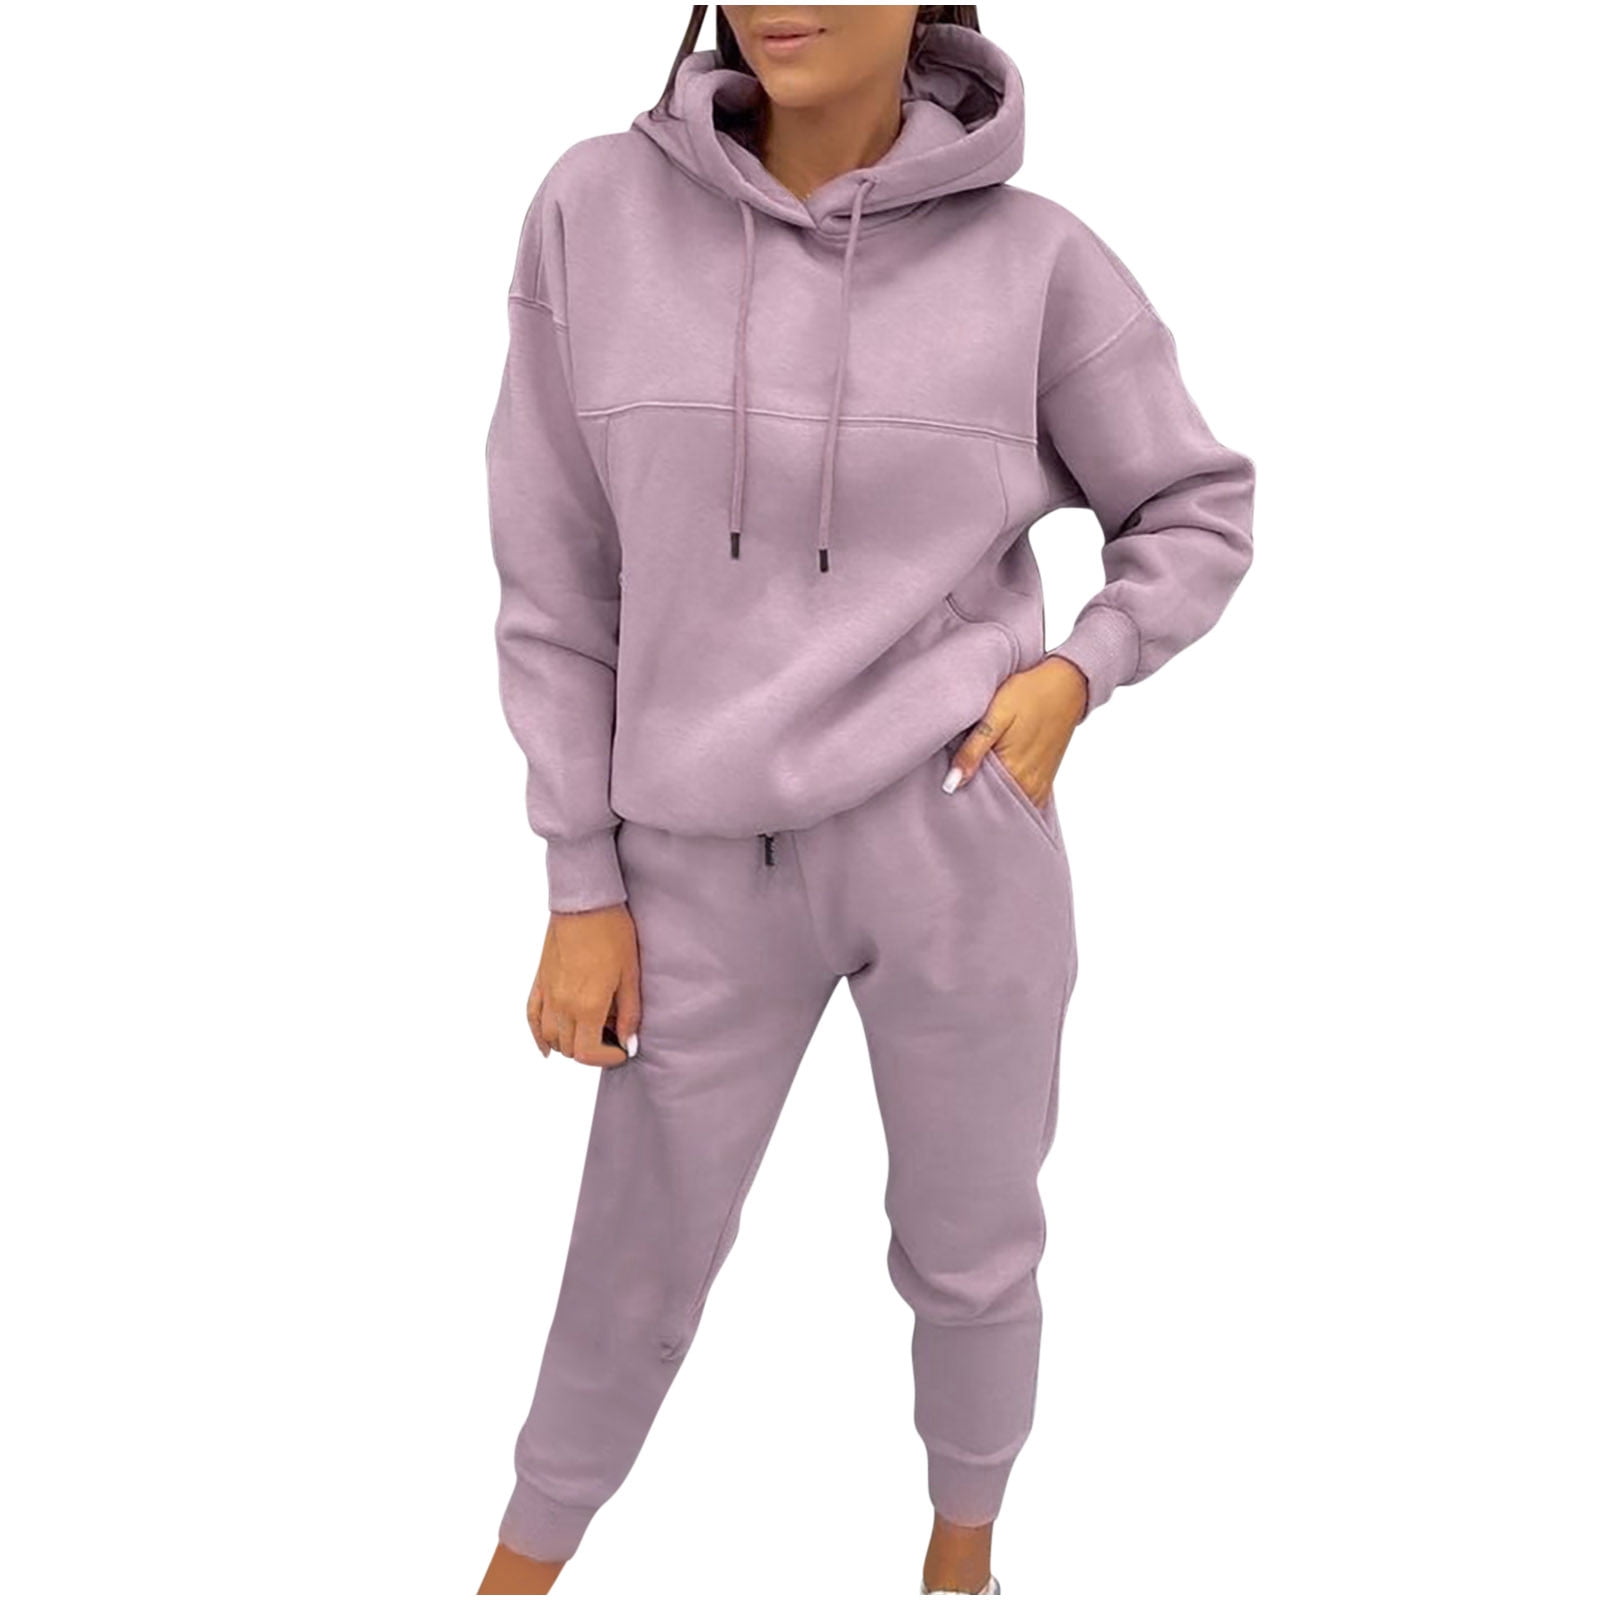 Tracksuit Sets Womens Ladies 2 Piece Sweatsuits Pullover Hoodie & Sweatpants  Jogging Suits Outfits